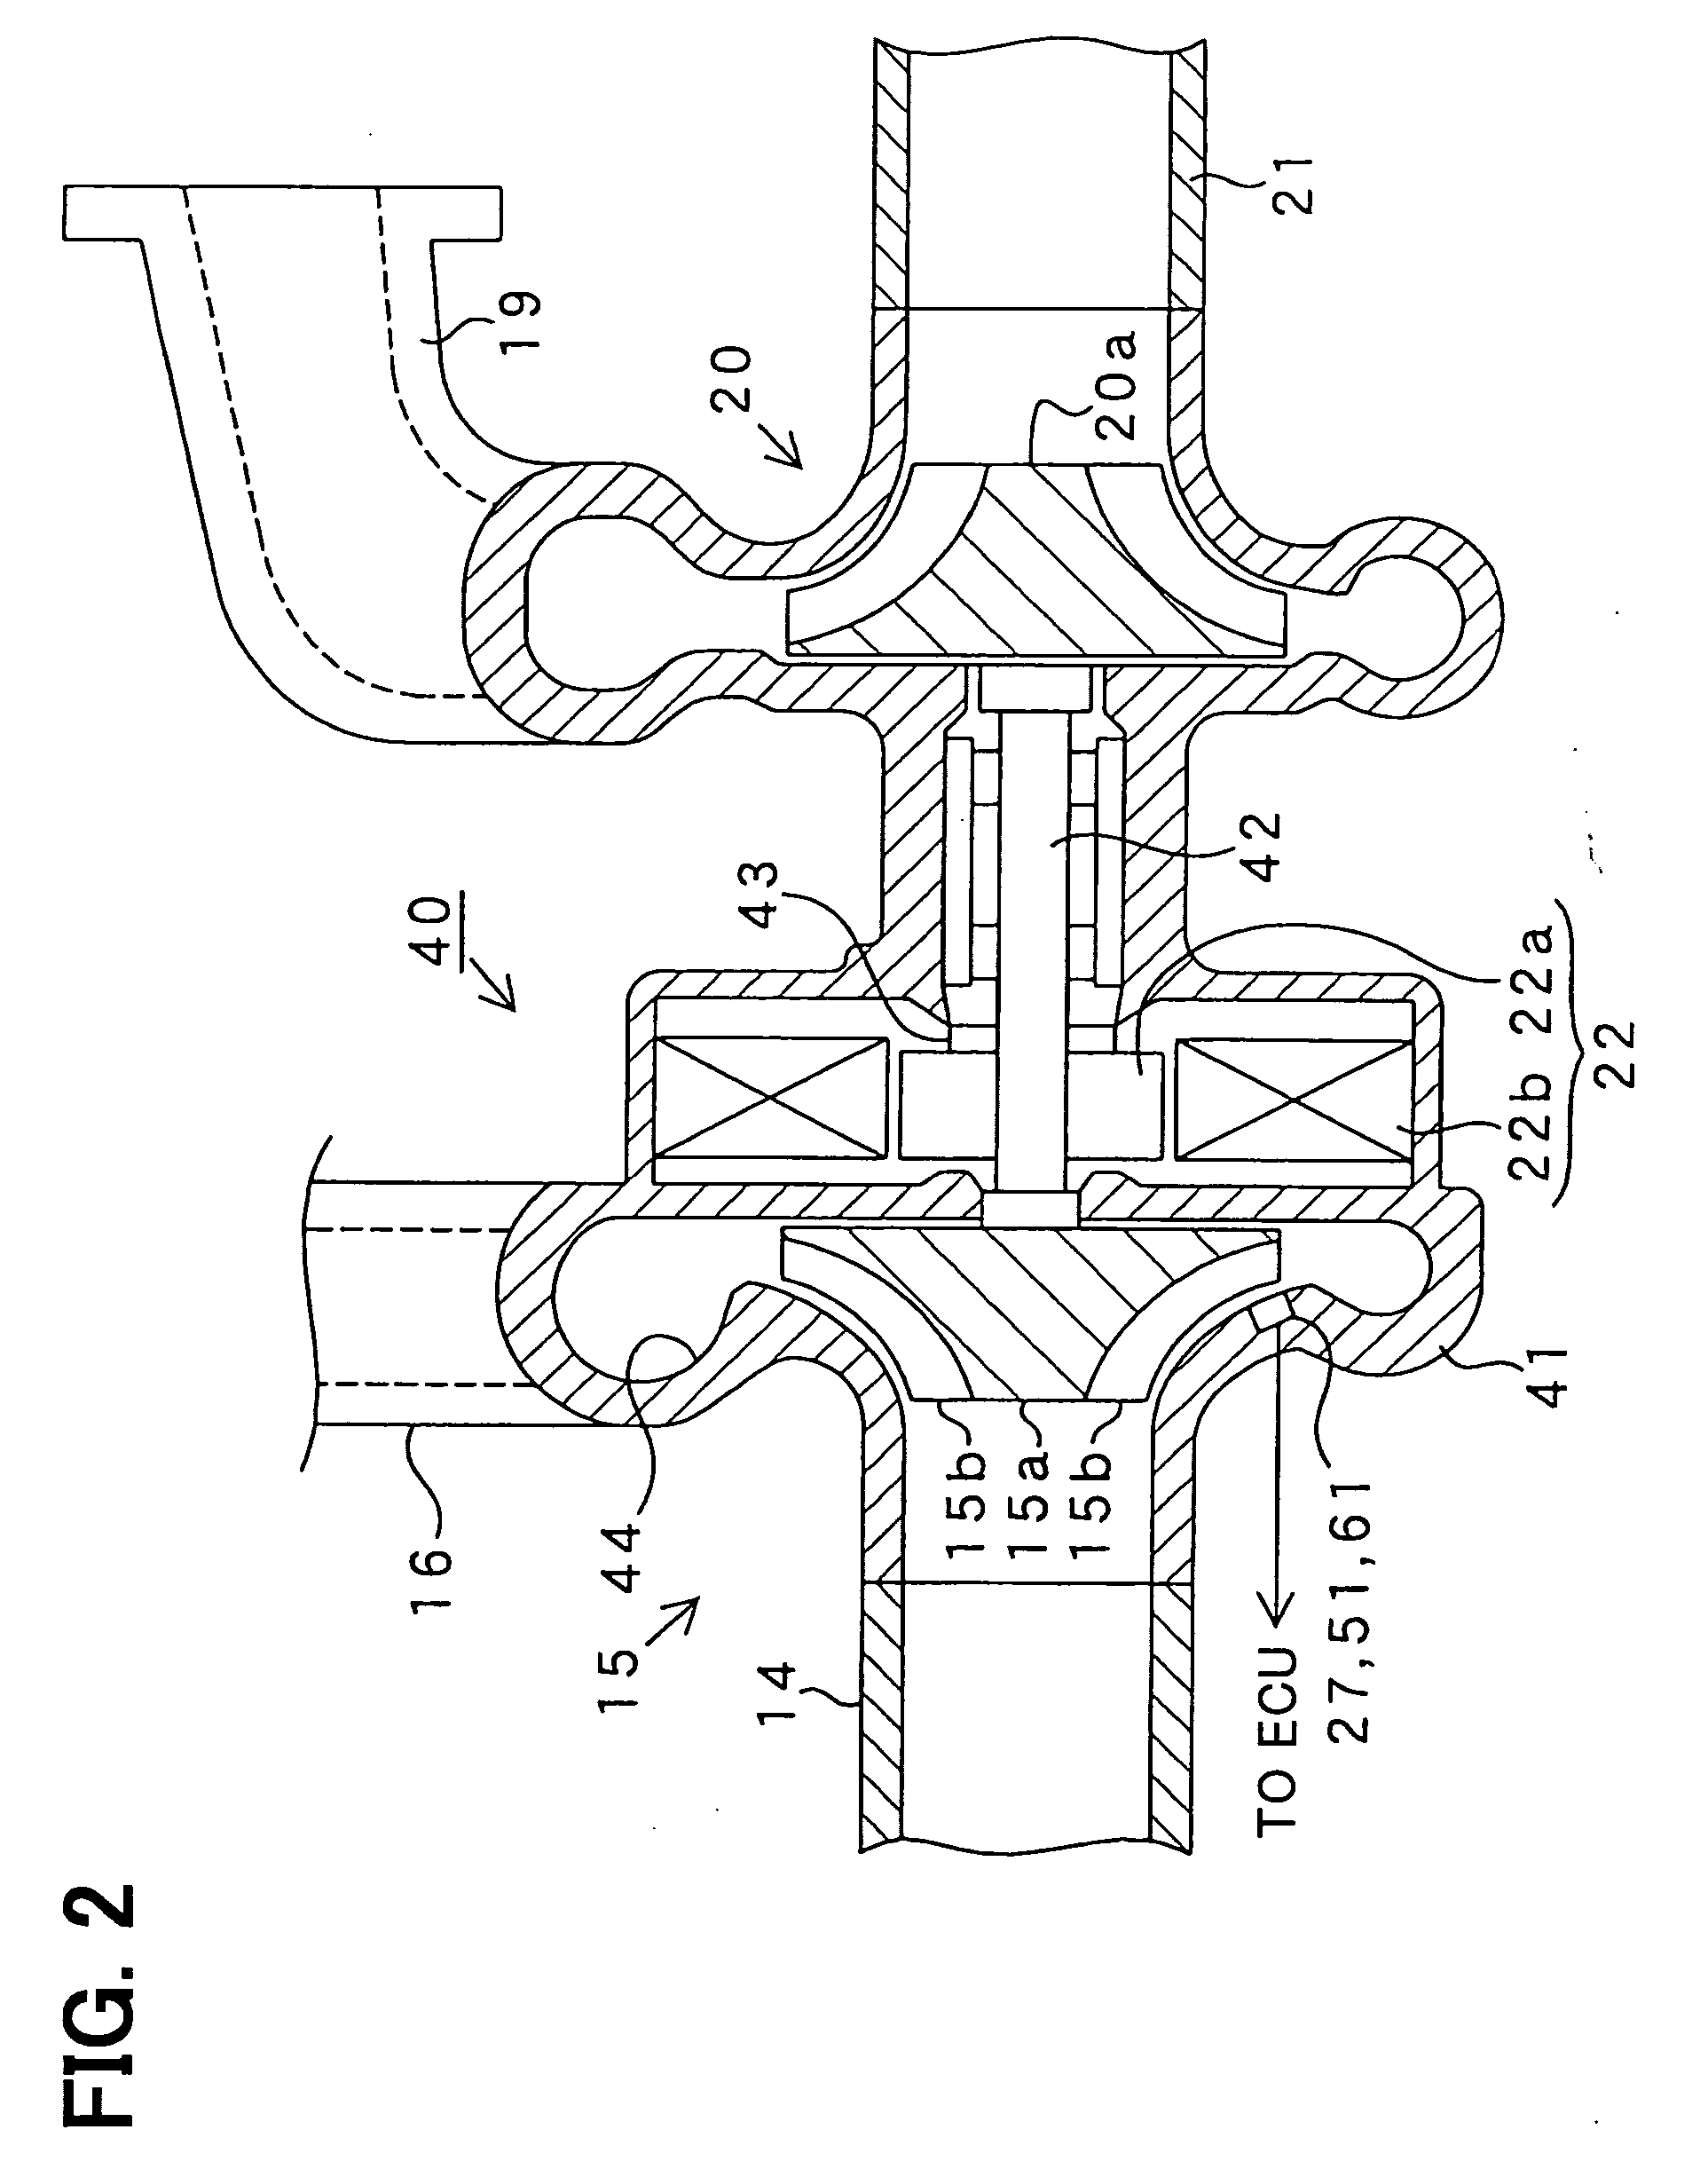 Rotational speed and position detector for supercharger compressor